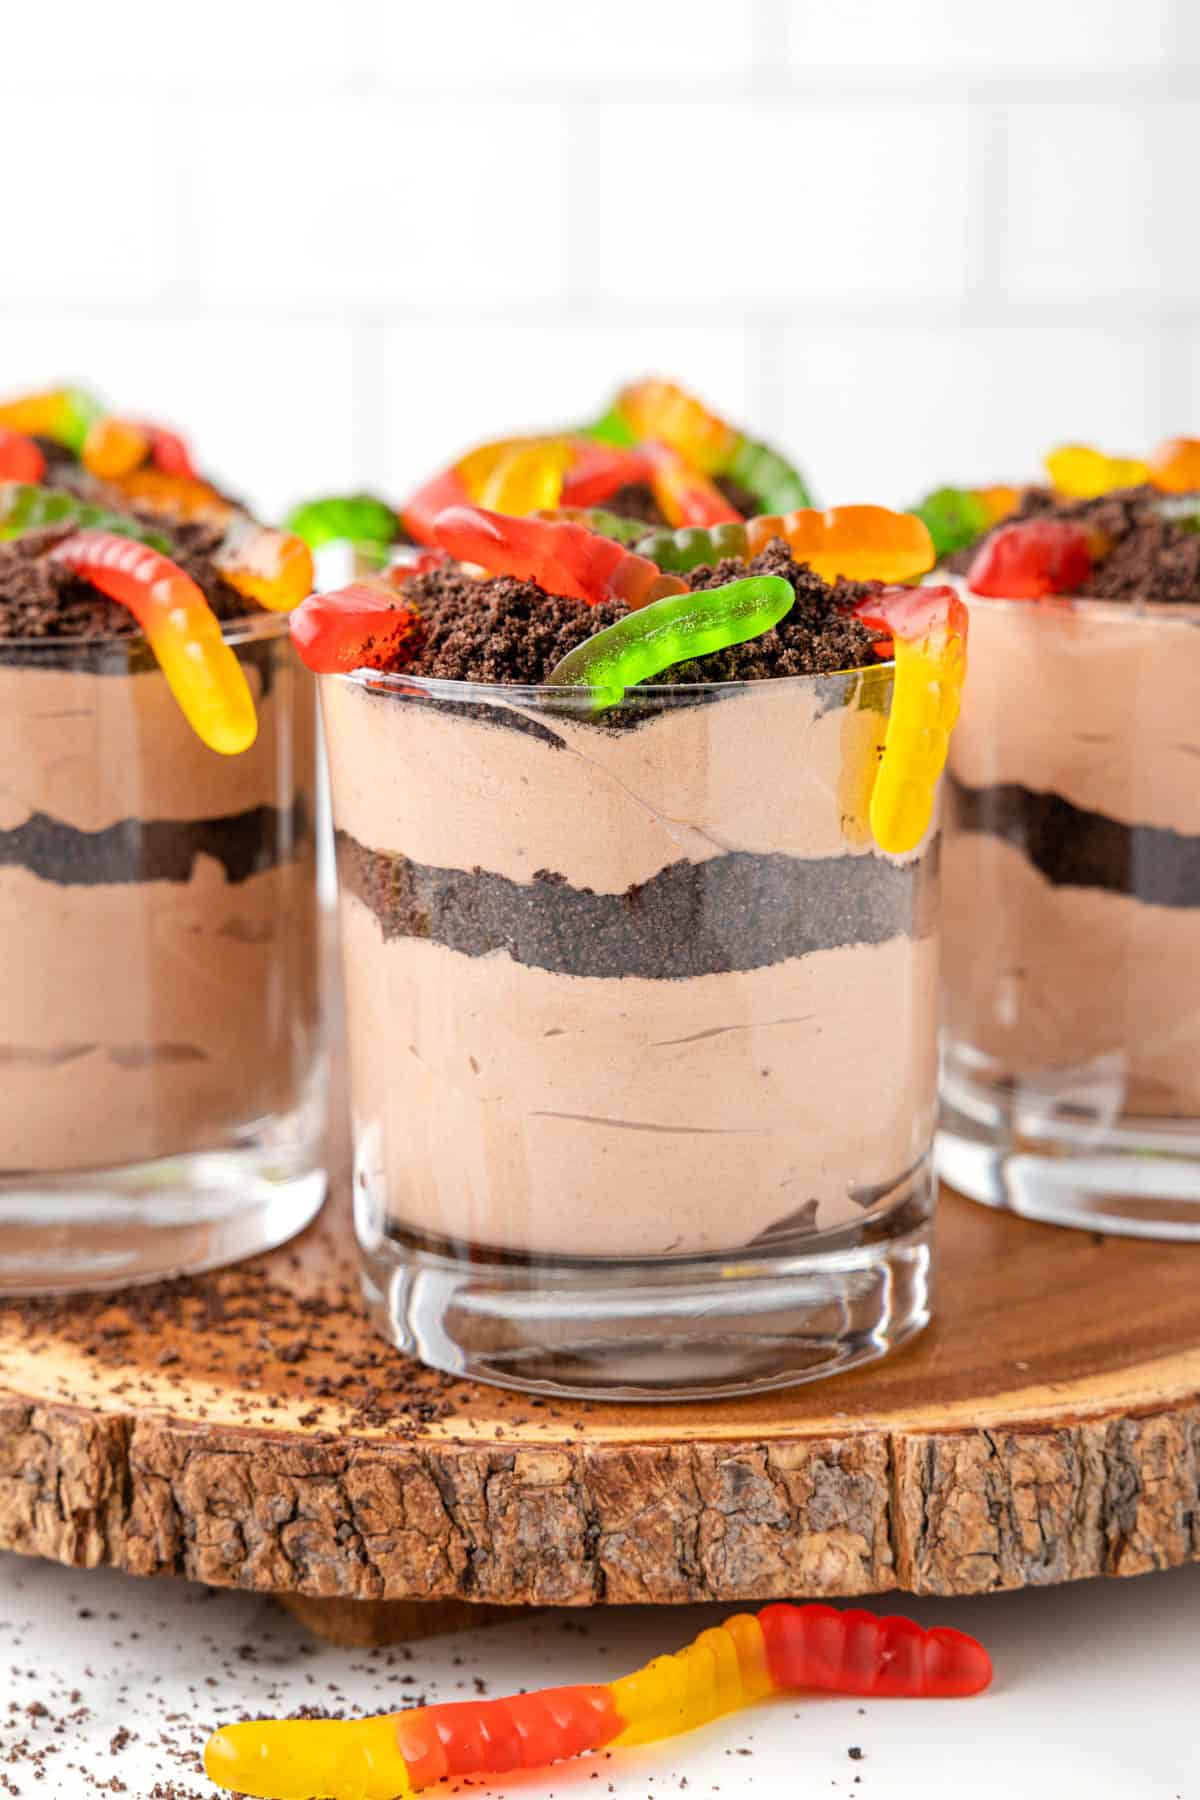 8. Simple Dirt Pudding Cups: 